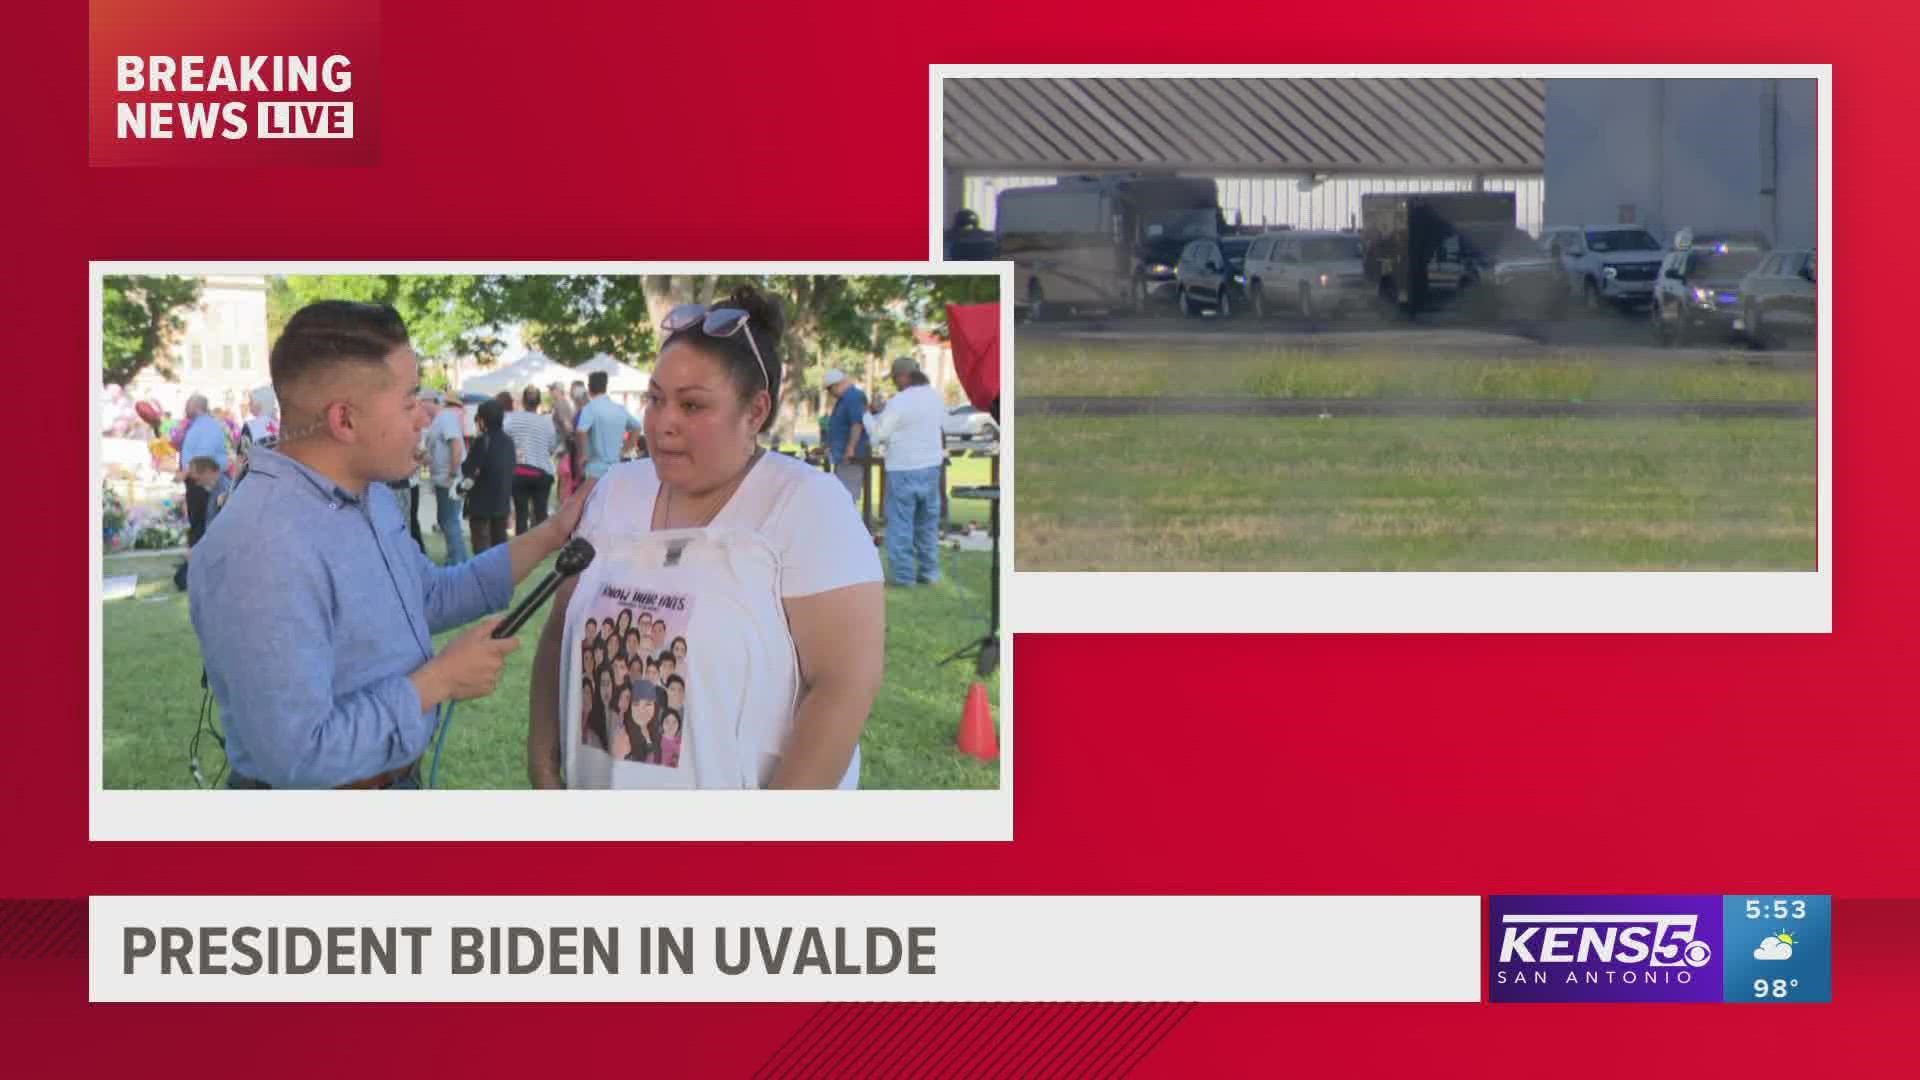 Johana Garcia, herself the mother to a 10-year-old child, said she felt compelled to be there for the Uvalde community.